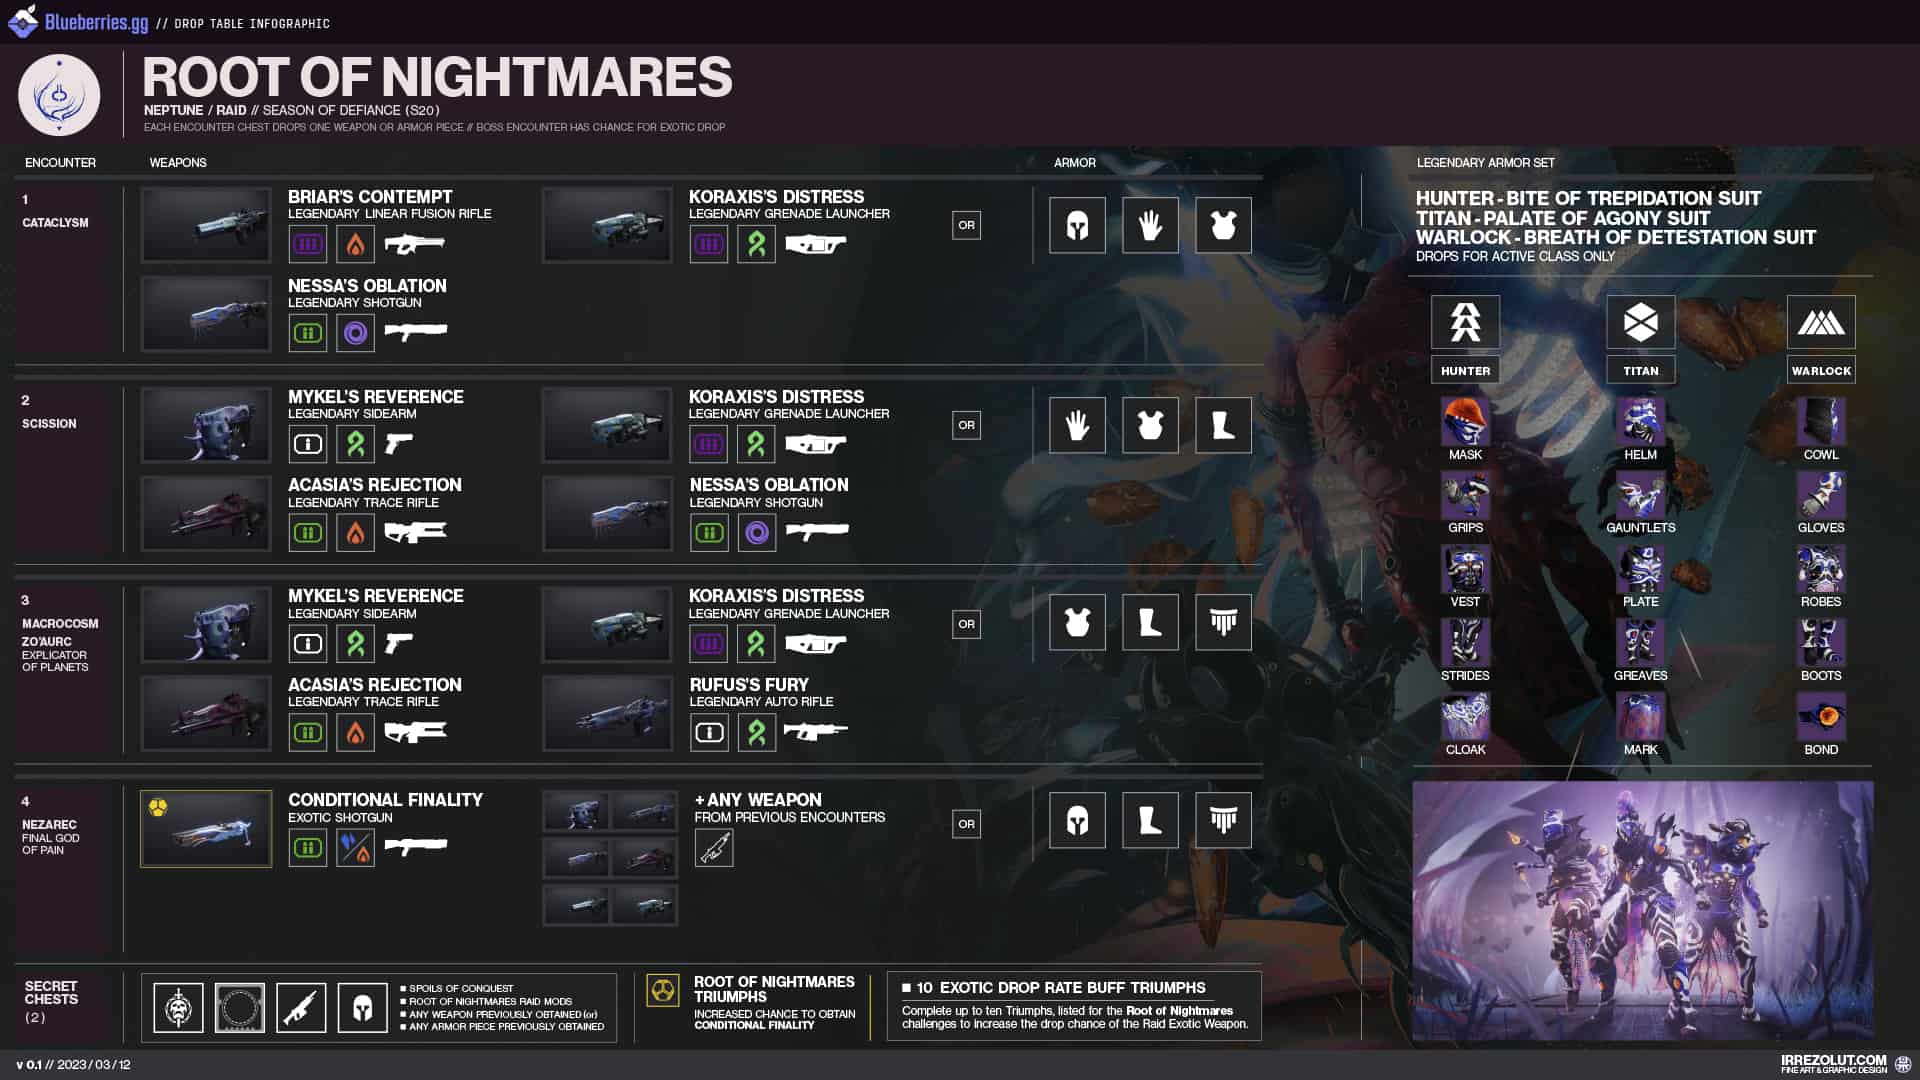 Root of Nightmares loot table infographic V3